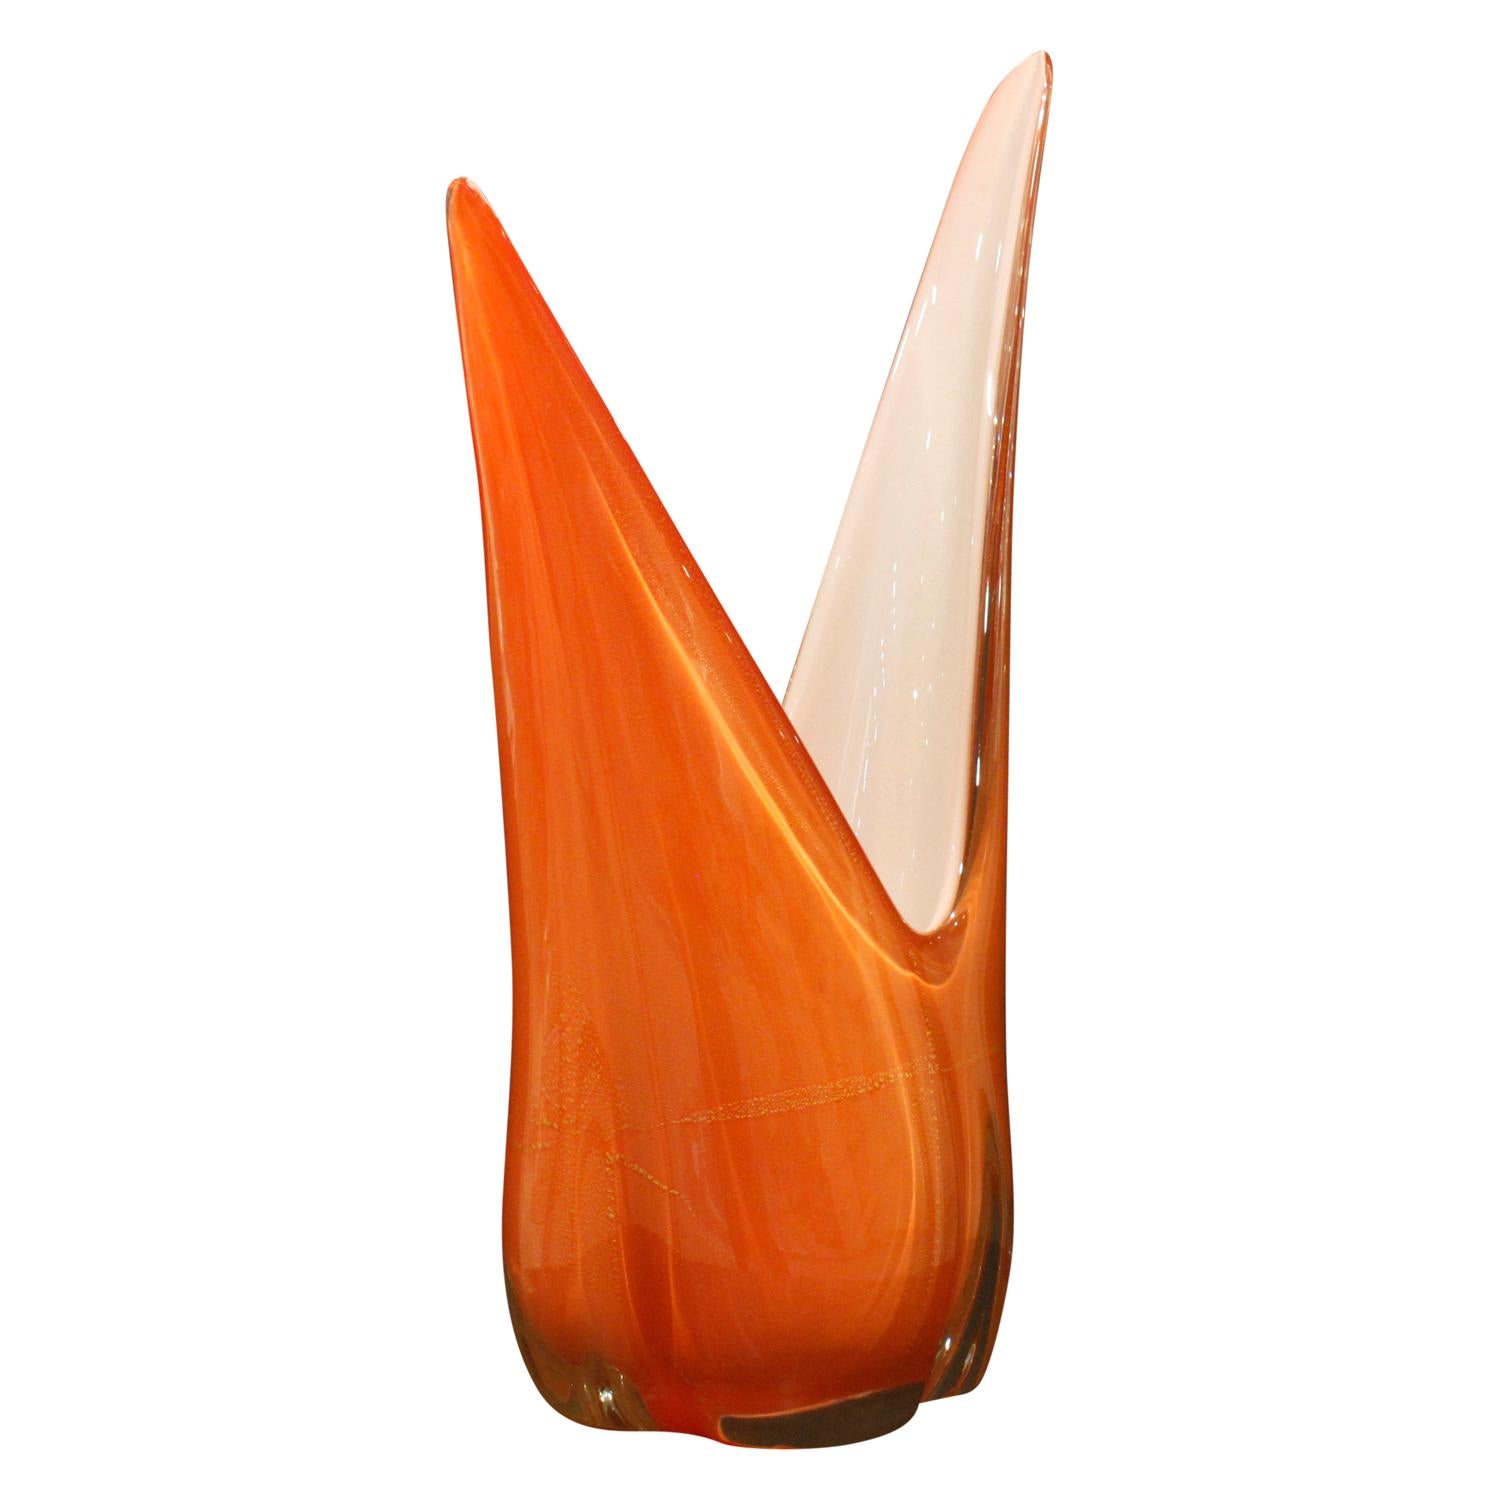 Large hand blown asymmetrical orange glass vase with gold foil by Seguso, Murano Italy, 1950s.